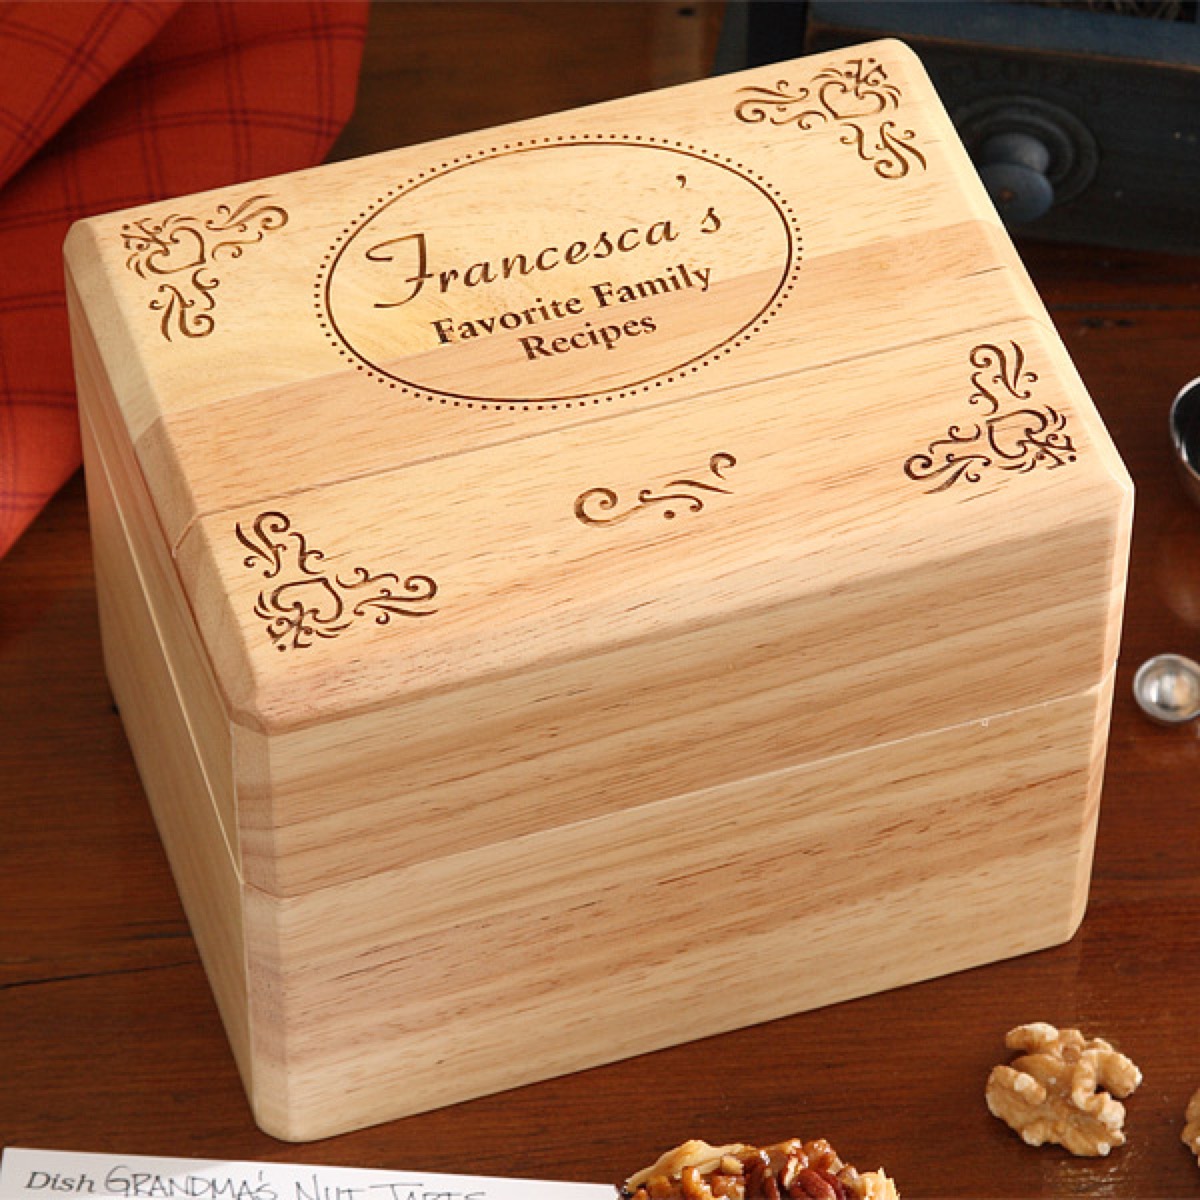 wooden box with "francesca's favorite family recipes" on it, best gifts for grandparents